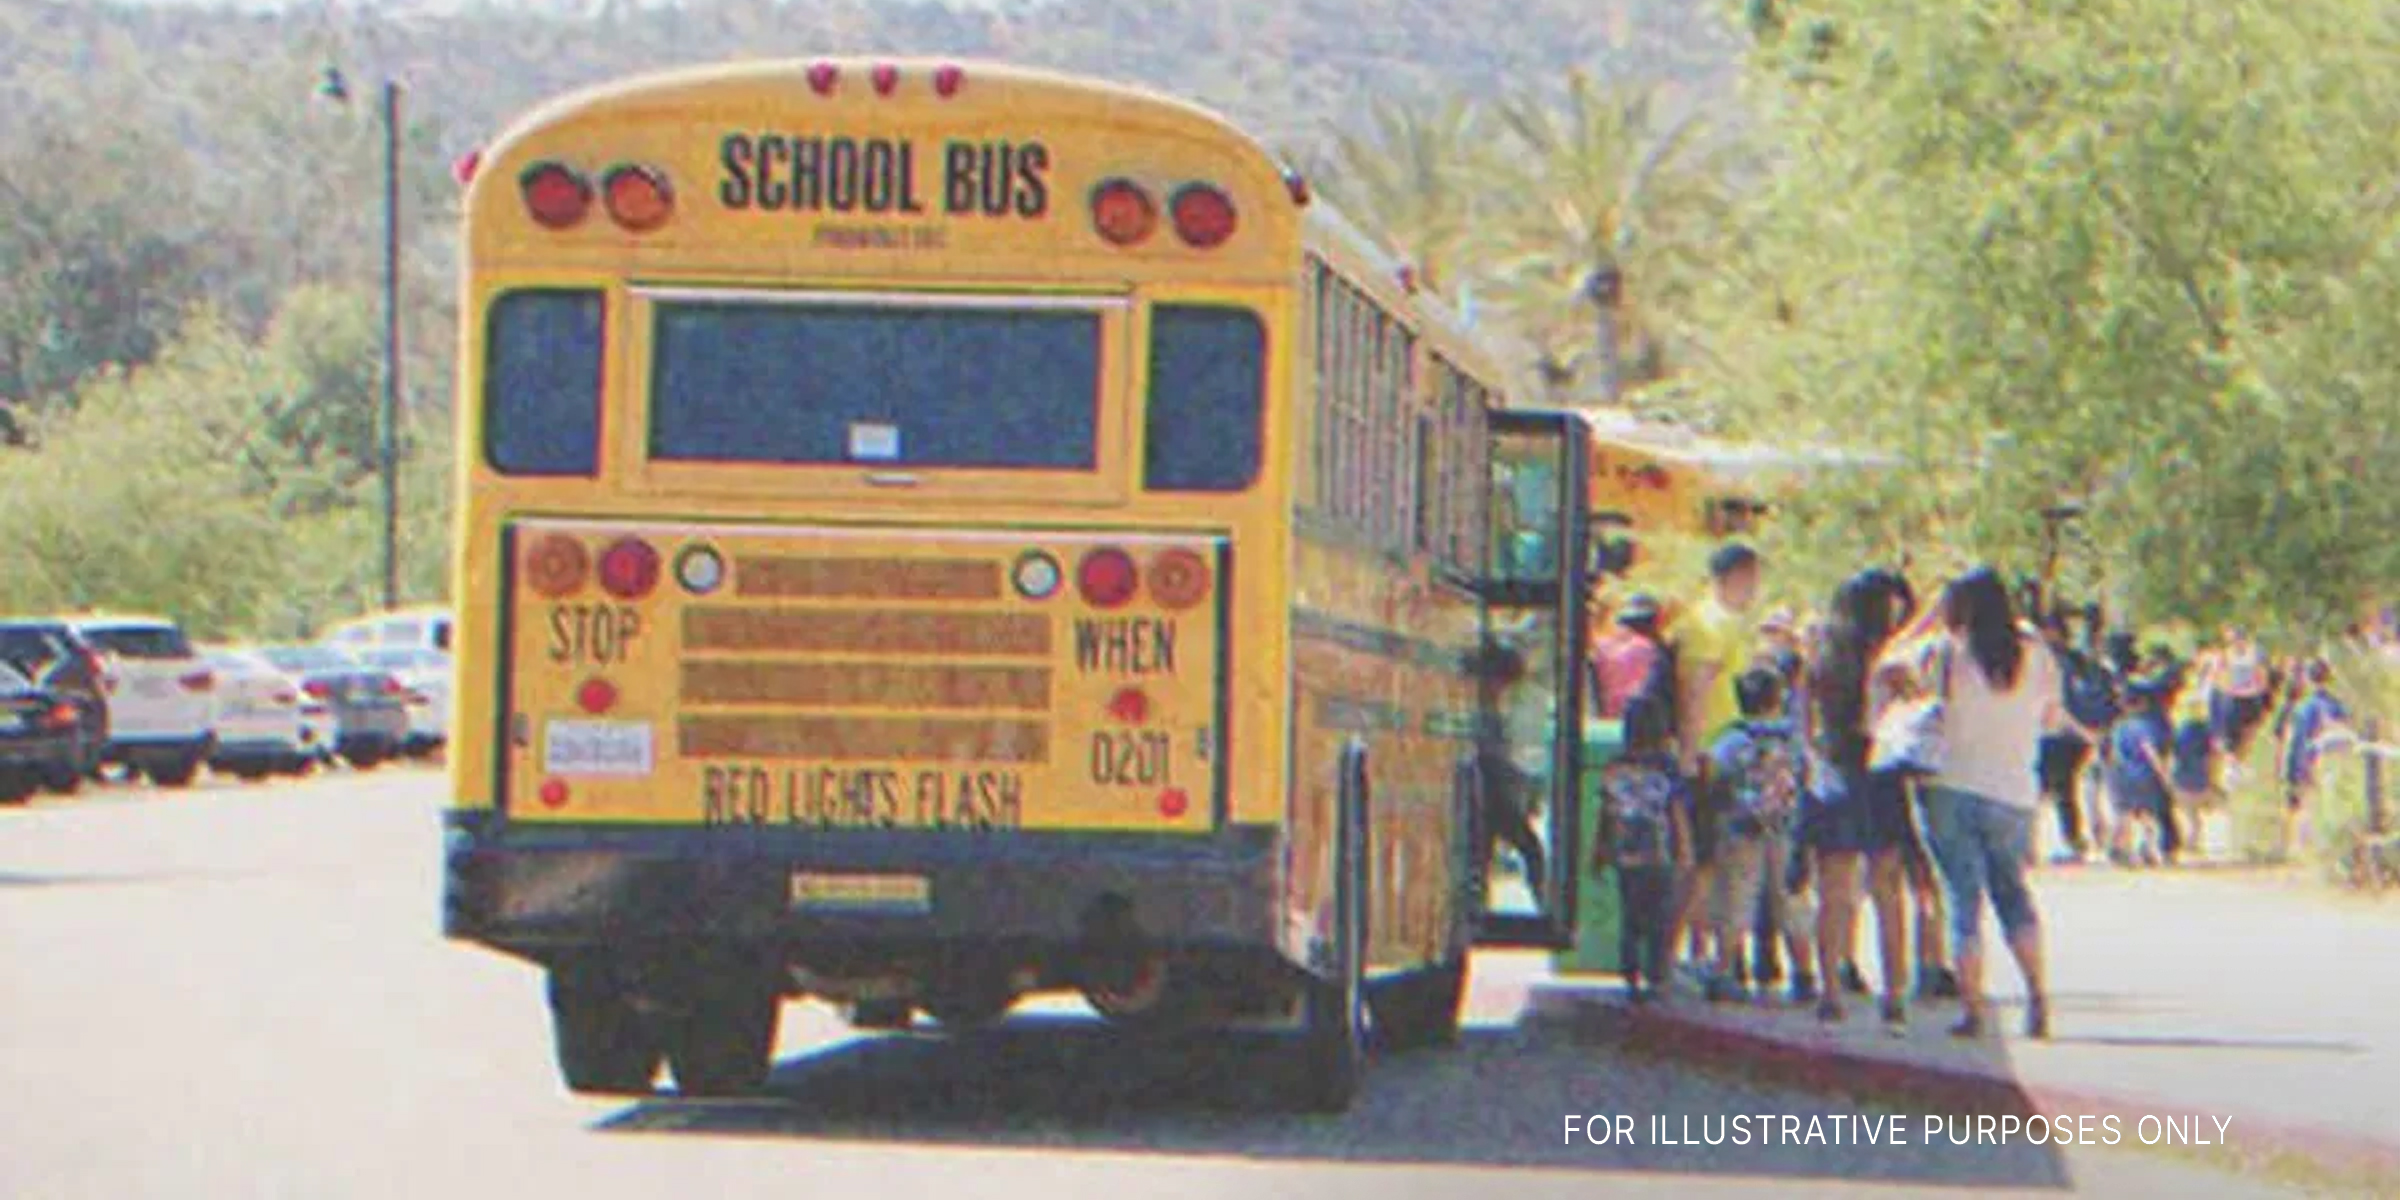 A school bus picking up a group of kids | Source: Shutterstock